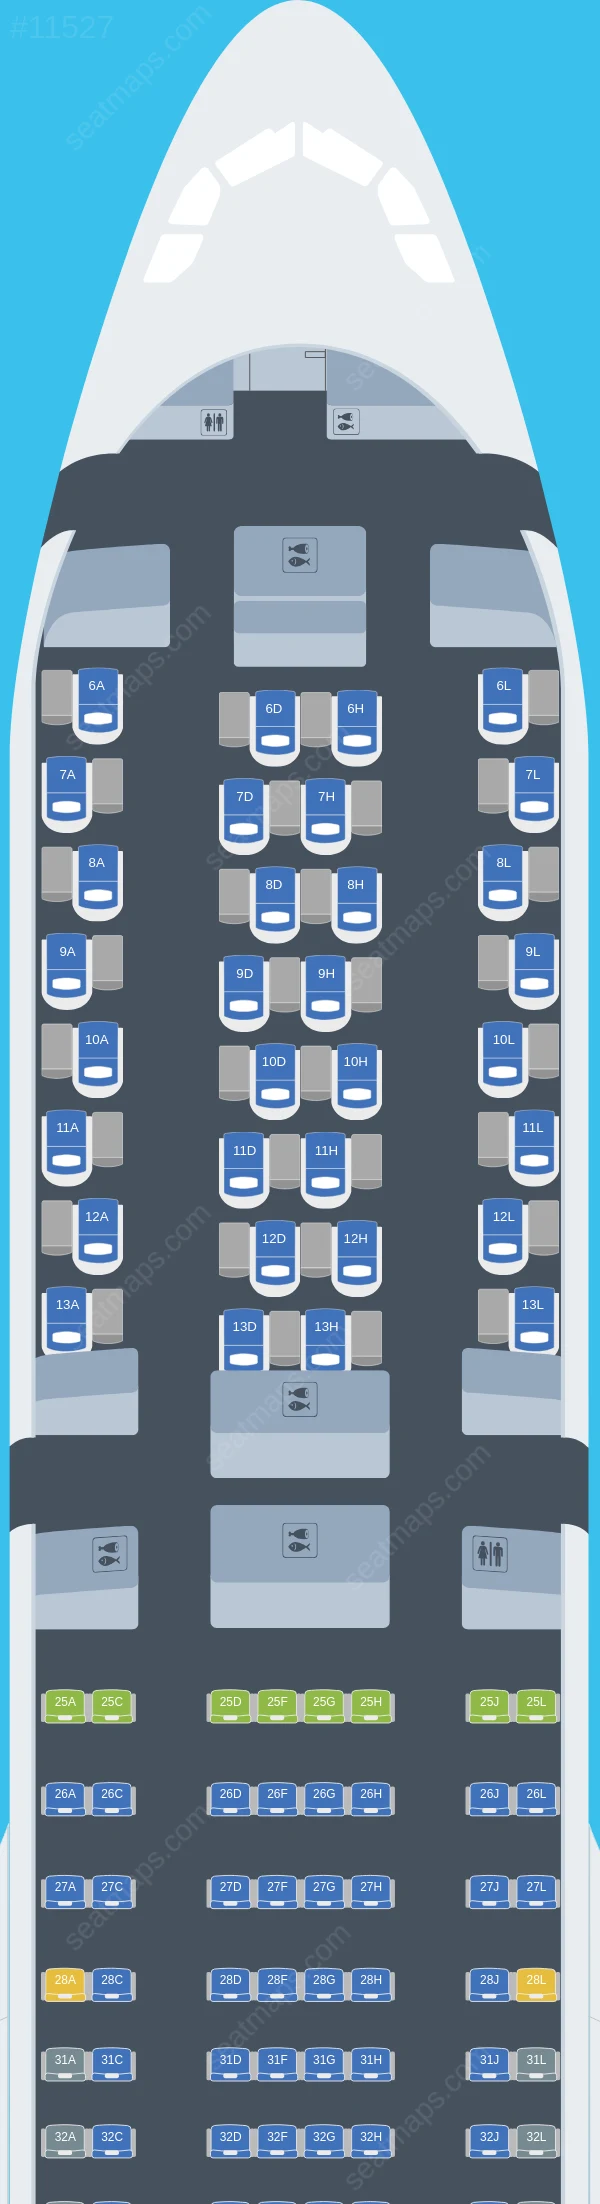 China Eastern Airbus A330-300 V.2 seatmap preview